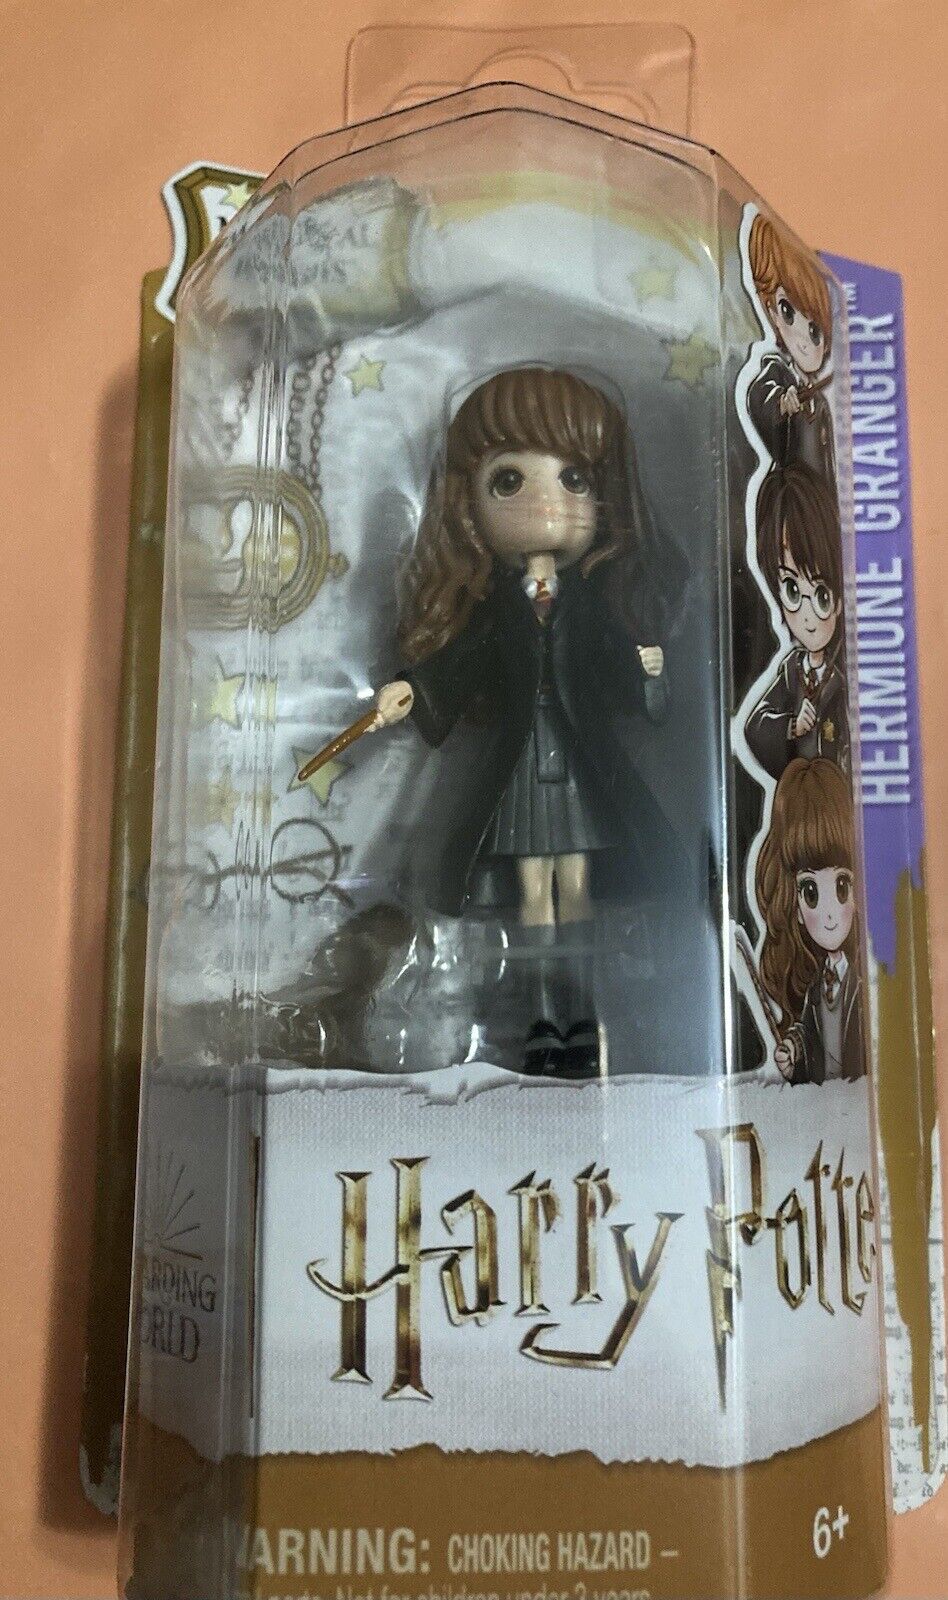 Hermione from Harry Potter -  Spinmaster toy figure (3 inch)